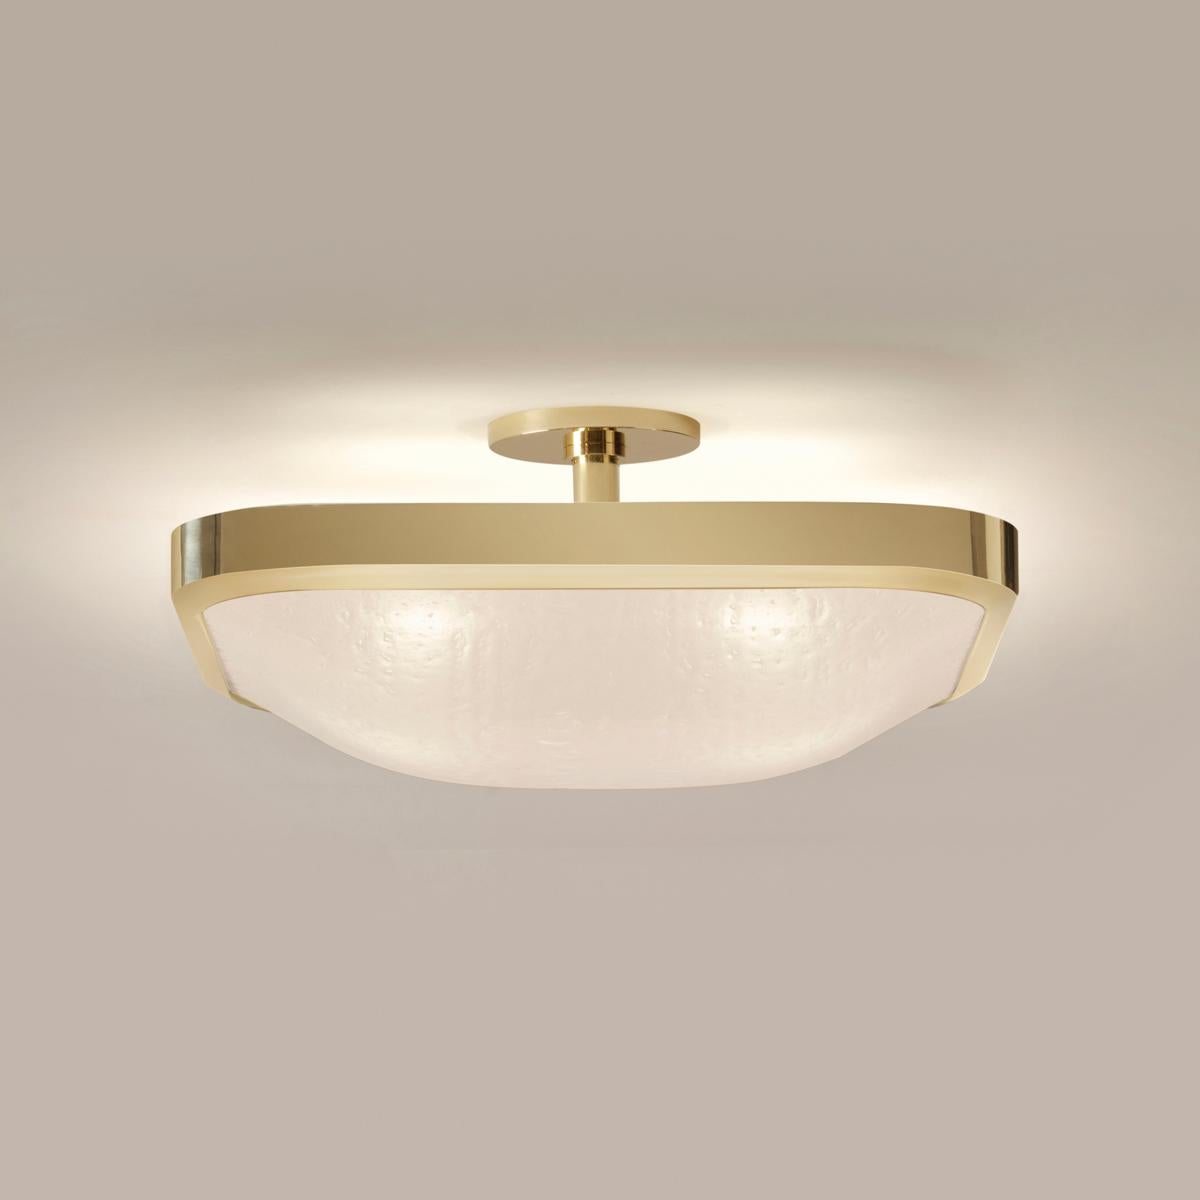 Contemporary Uno Square Ceiling Light by Gaspare Asaro-Satin Brass Finish For Sale